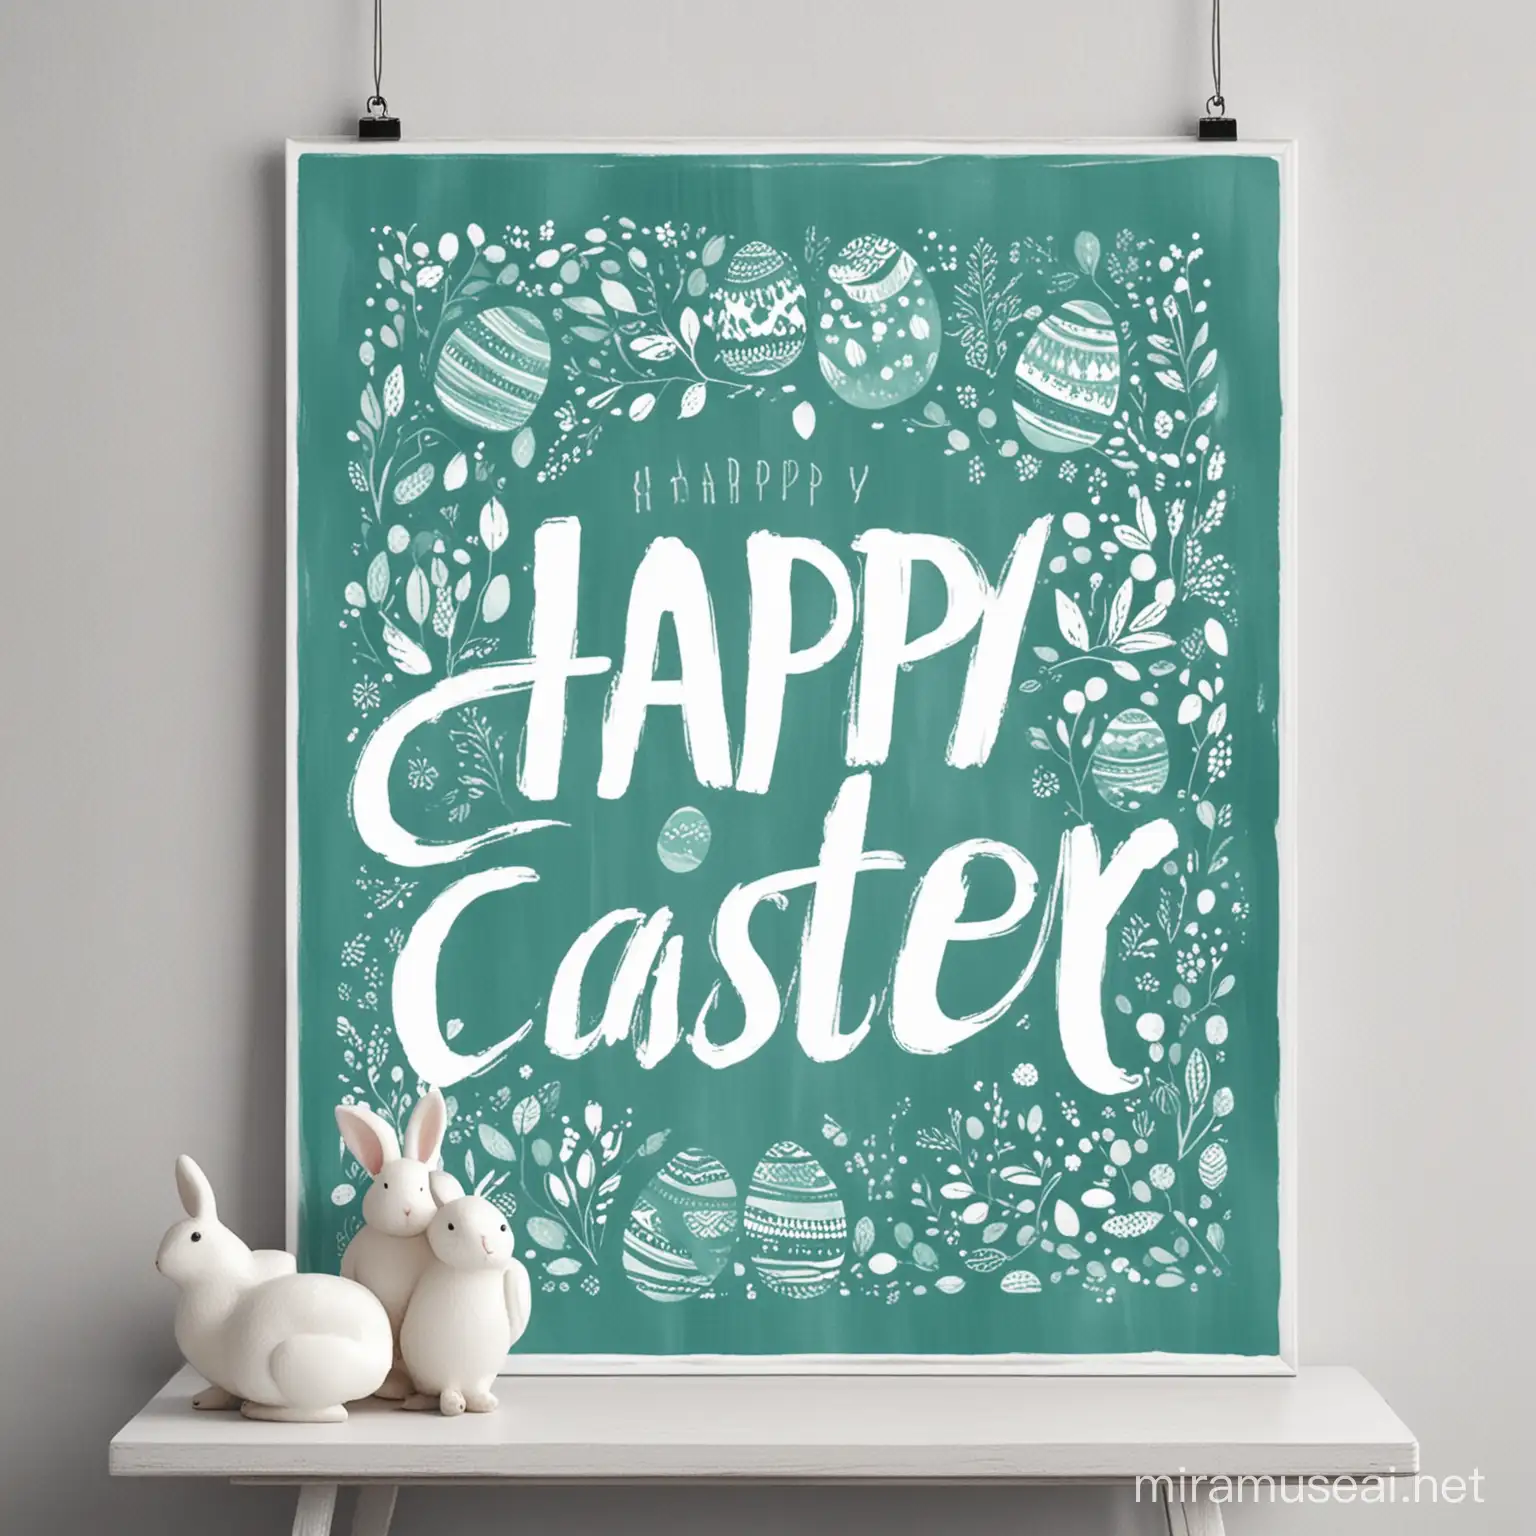 Happy easter poster in shades of teal green and white